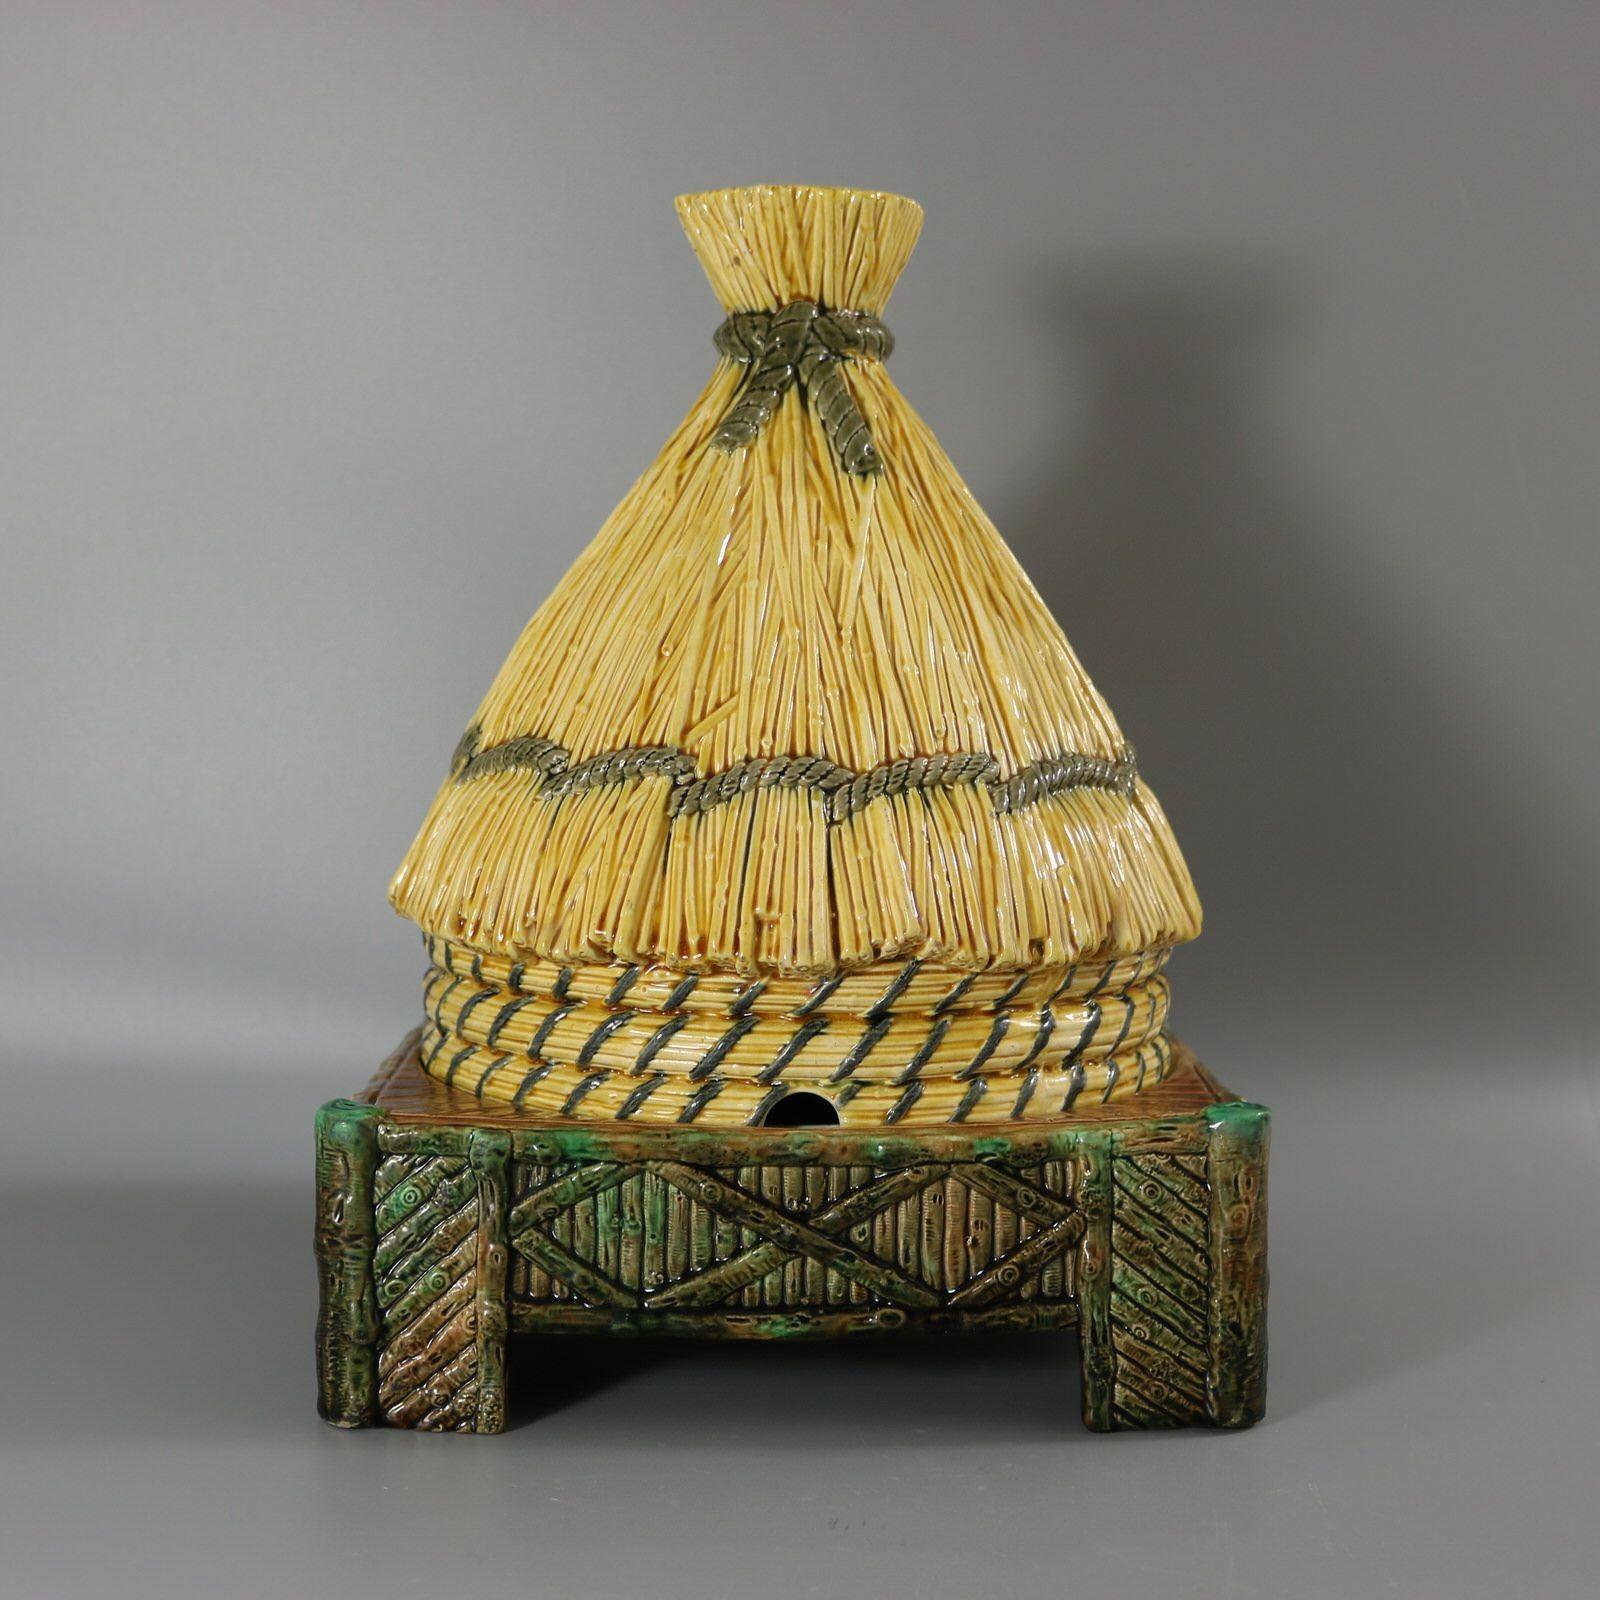 George Jones Majolica cheese keep which features a straw thatched beehive, bound with rope. The base in the form of a wooden platform. Yellow ground version. Colouration: yellow, brown, green, are predominant. Bears a pattern number, '3249'. English